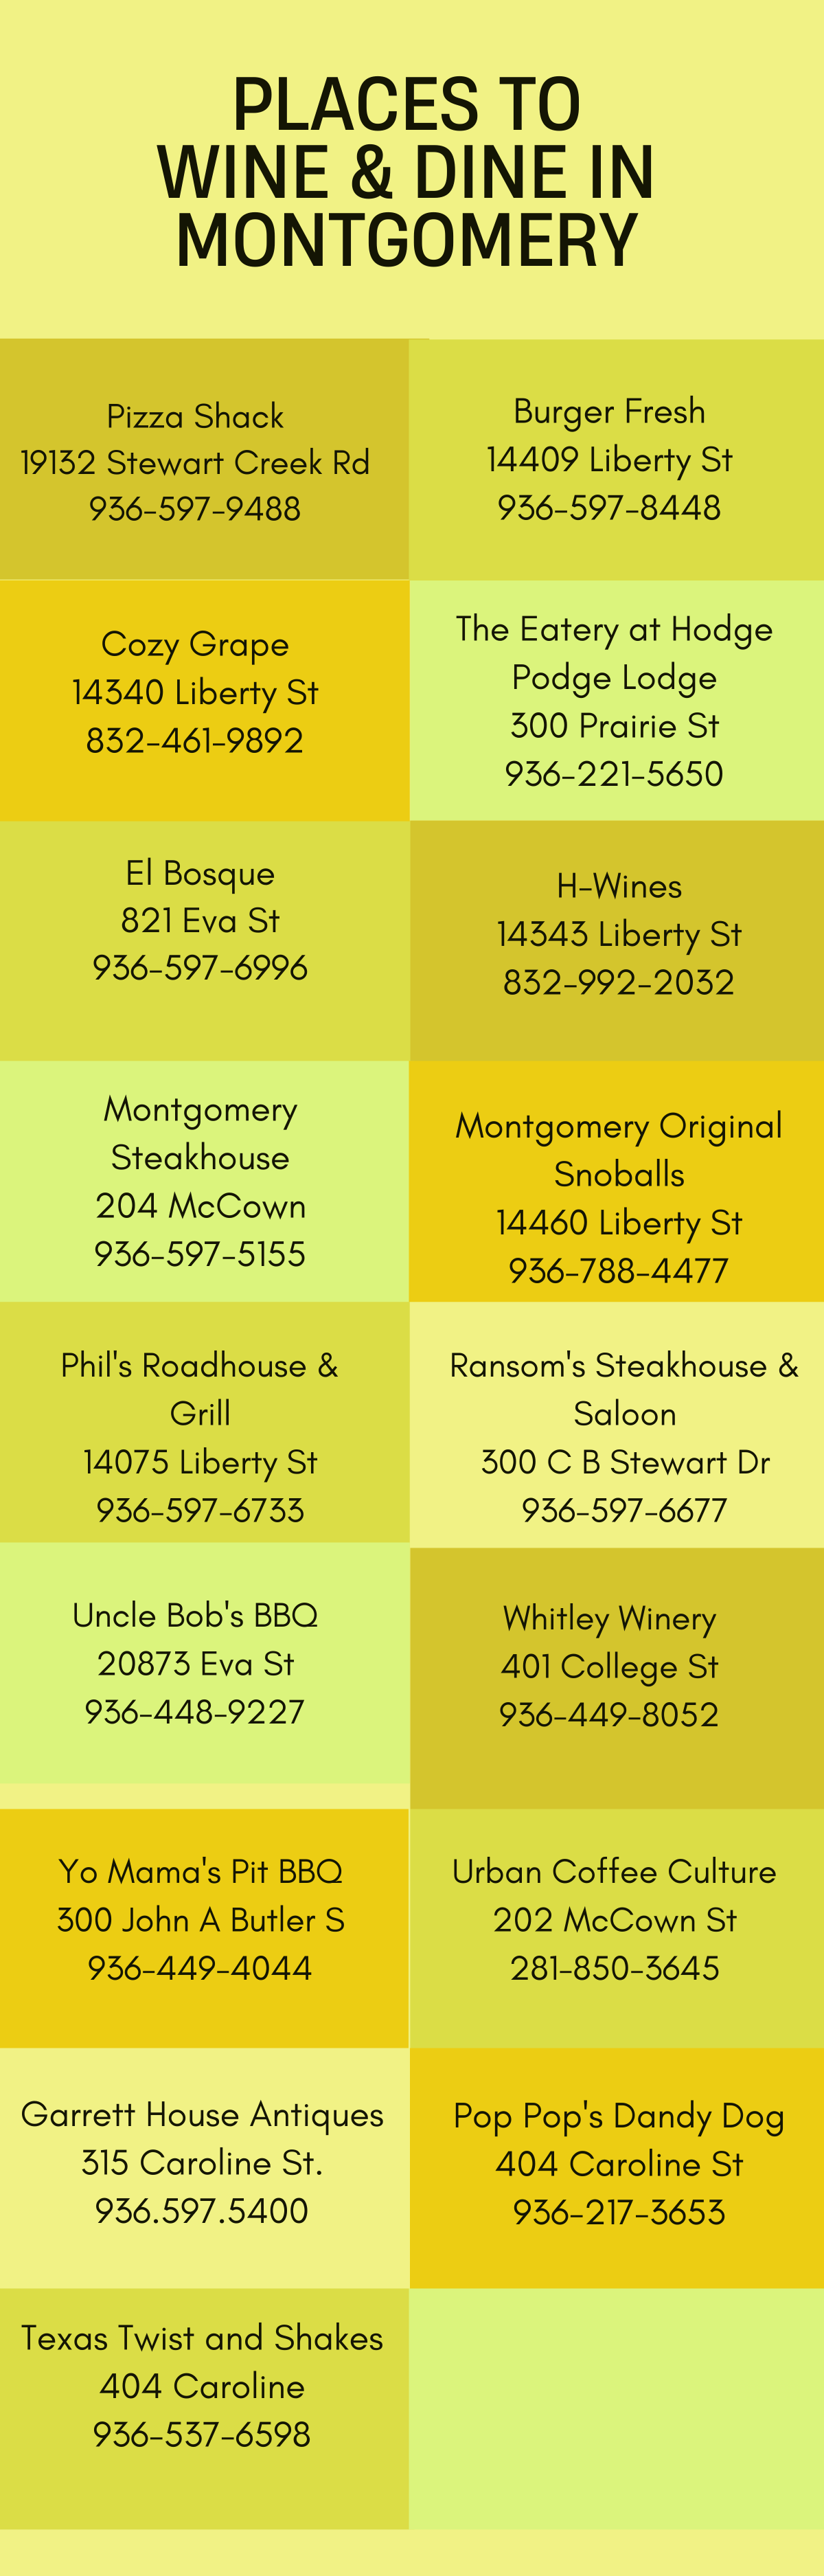 Places to dine in Montgomery